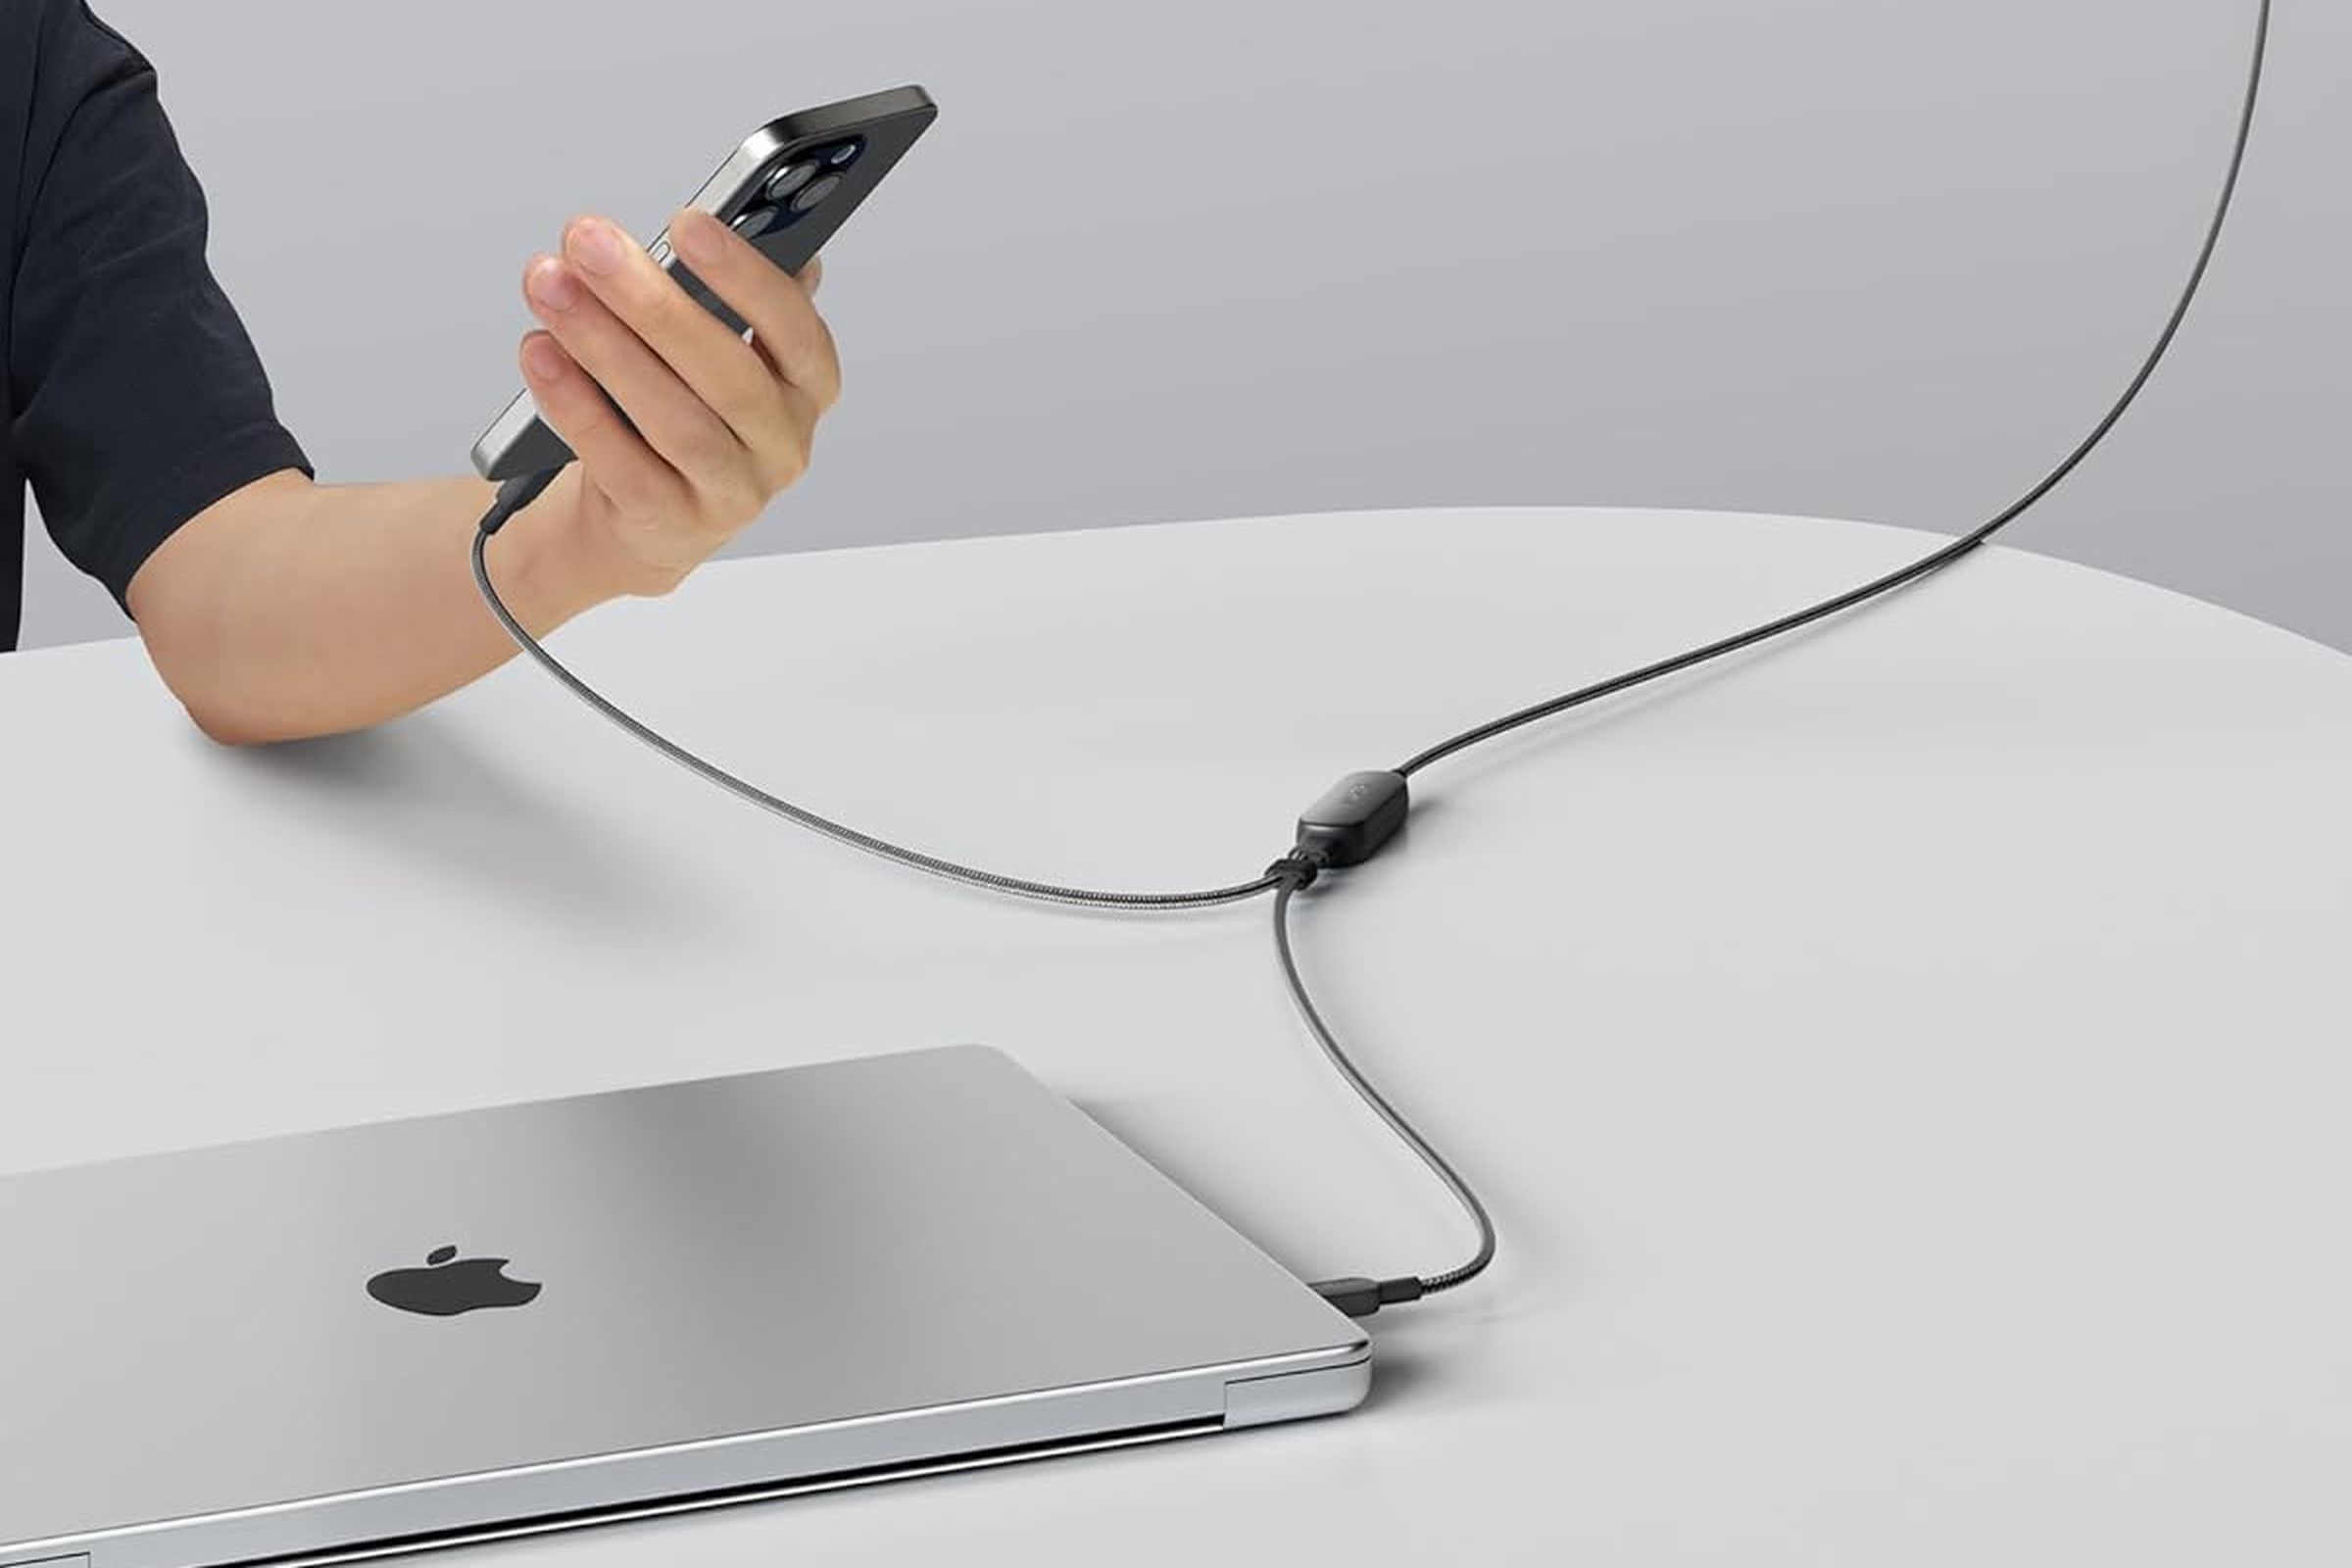 Anker’s new dual-headed USB-C cable charges two devices at once